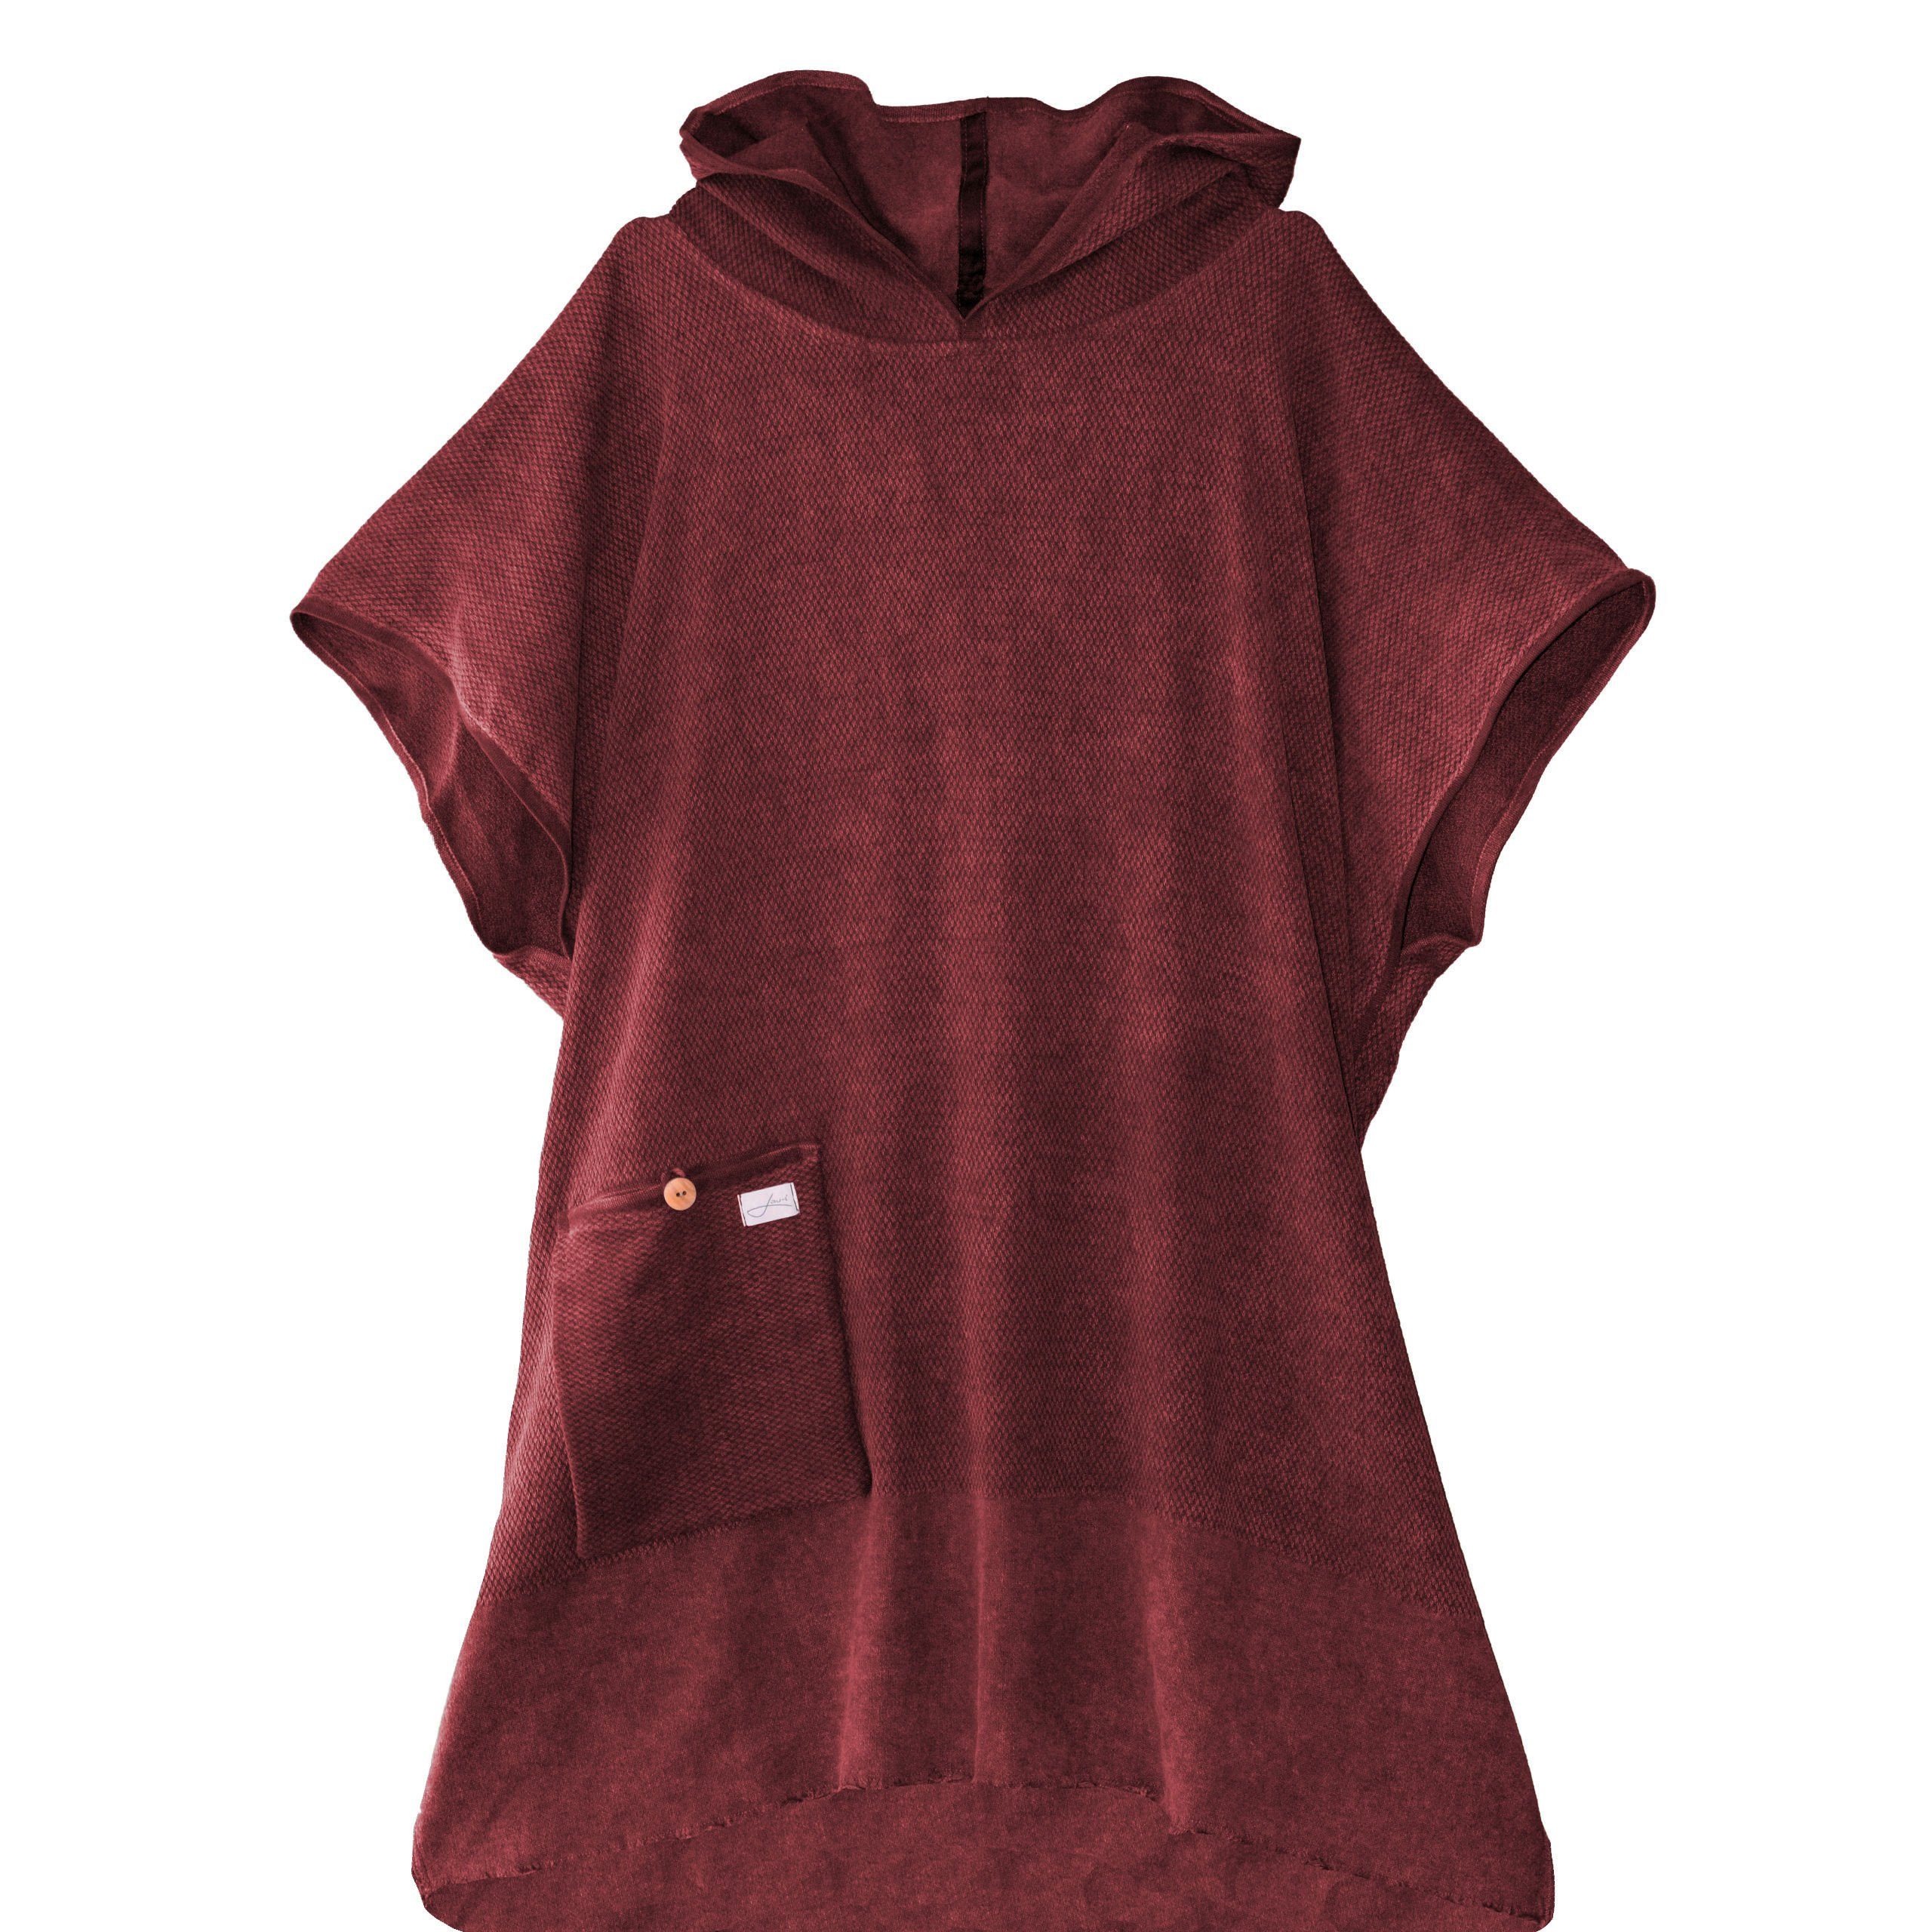 Badeponcho Germany in Kapuze Badeponcho Lou-i Surfponcho Made & burgundy trocken), schnell (leicht